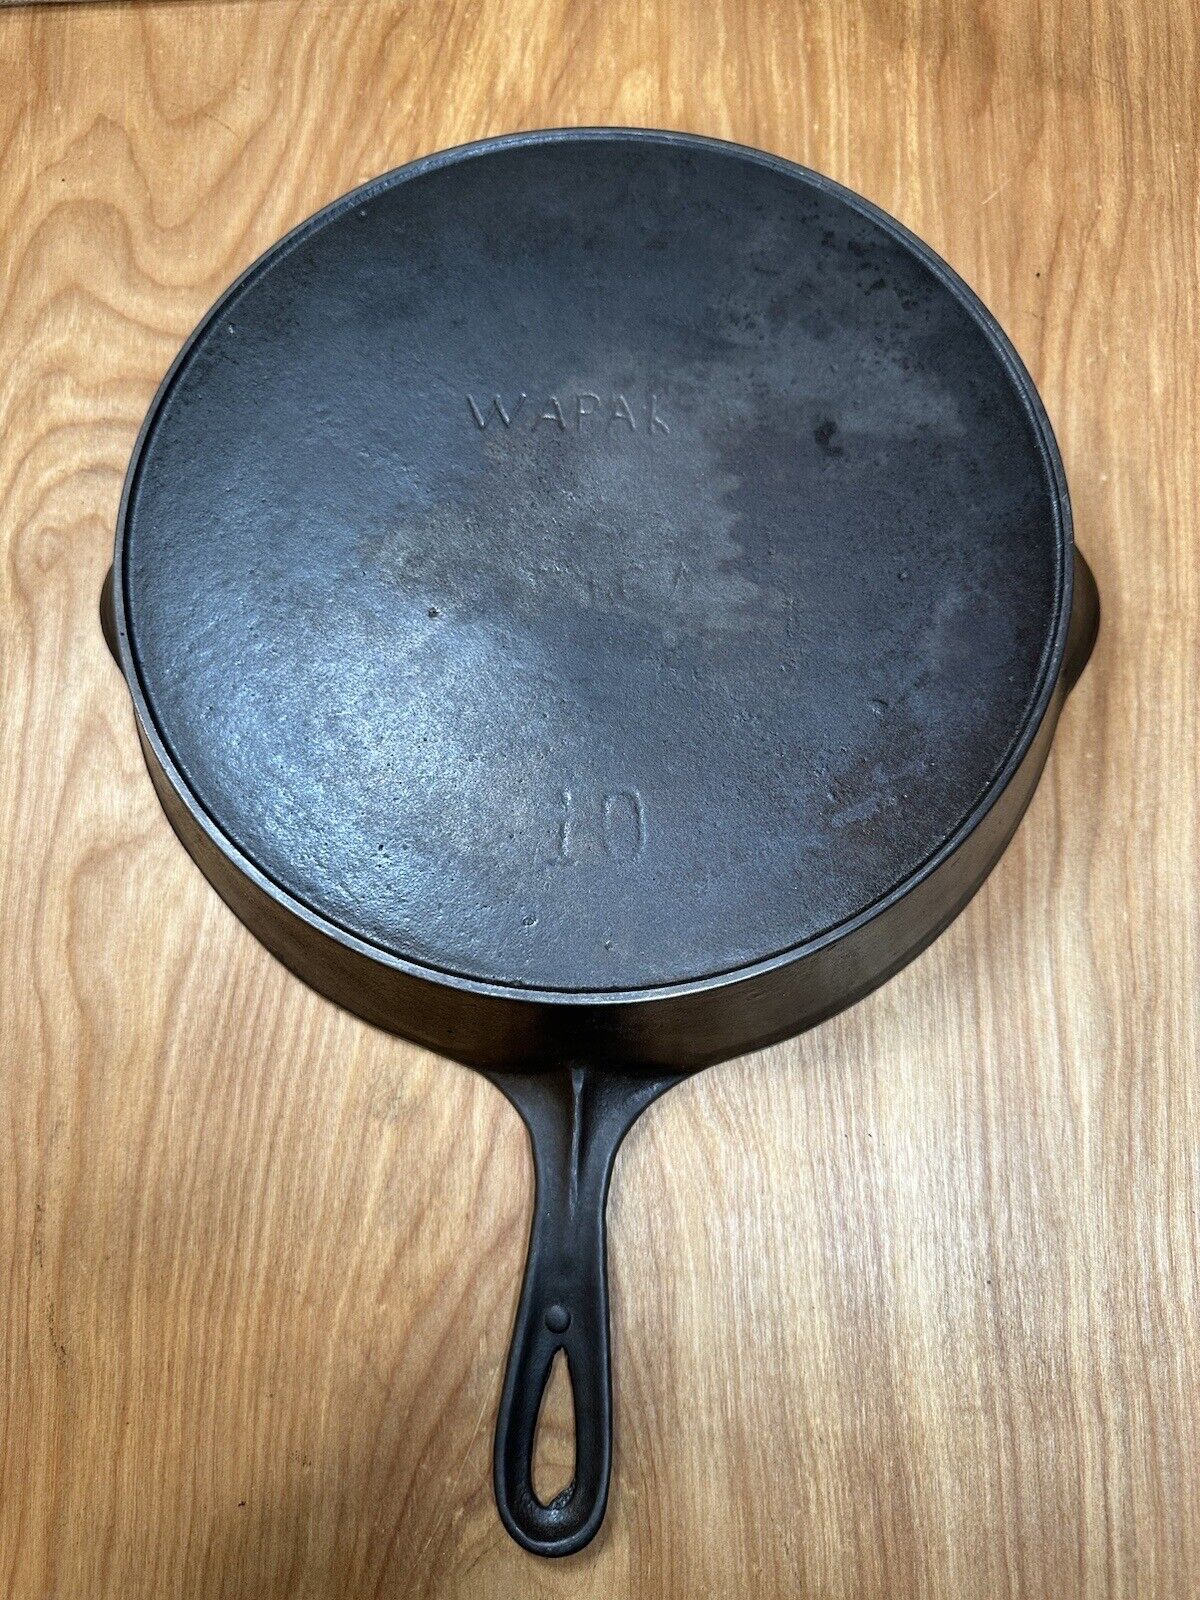 Antique WAPAK #10 Cast Iron Skillet From Griswold Erie Mold Old Piece Great